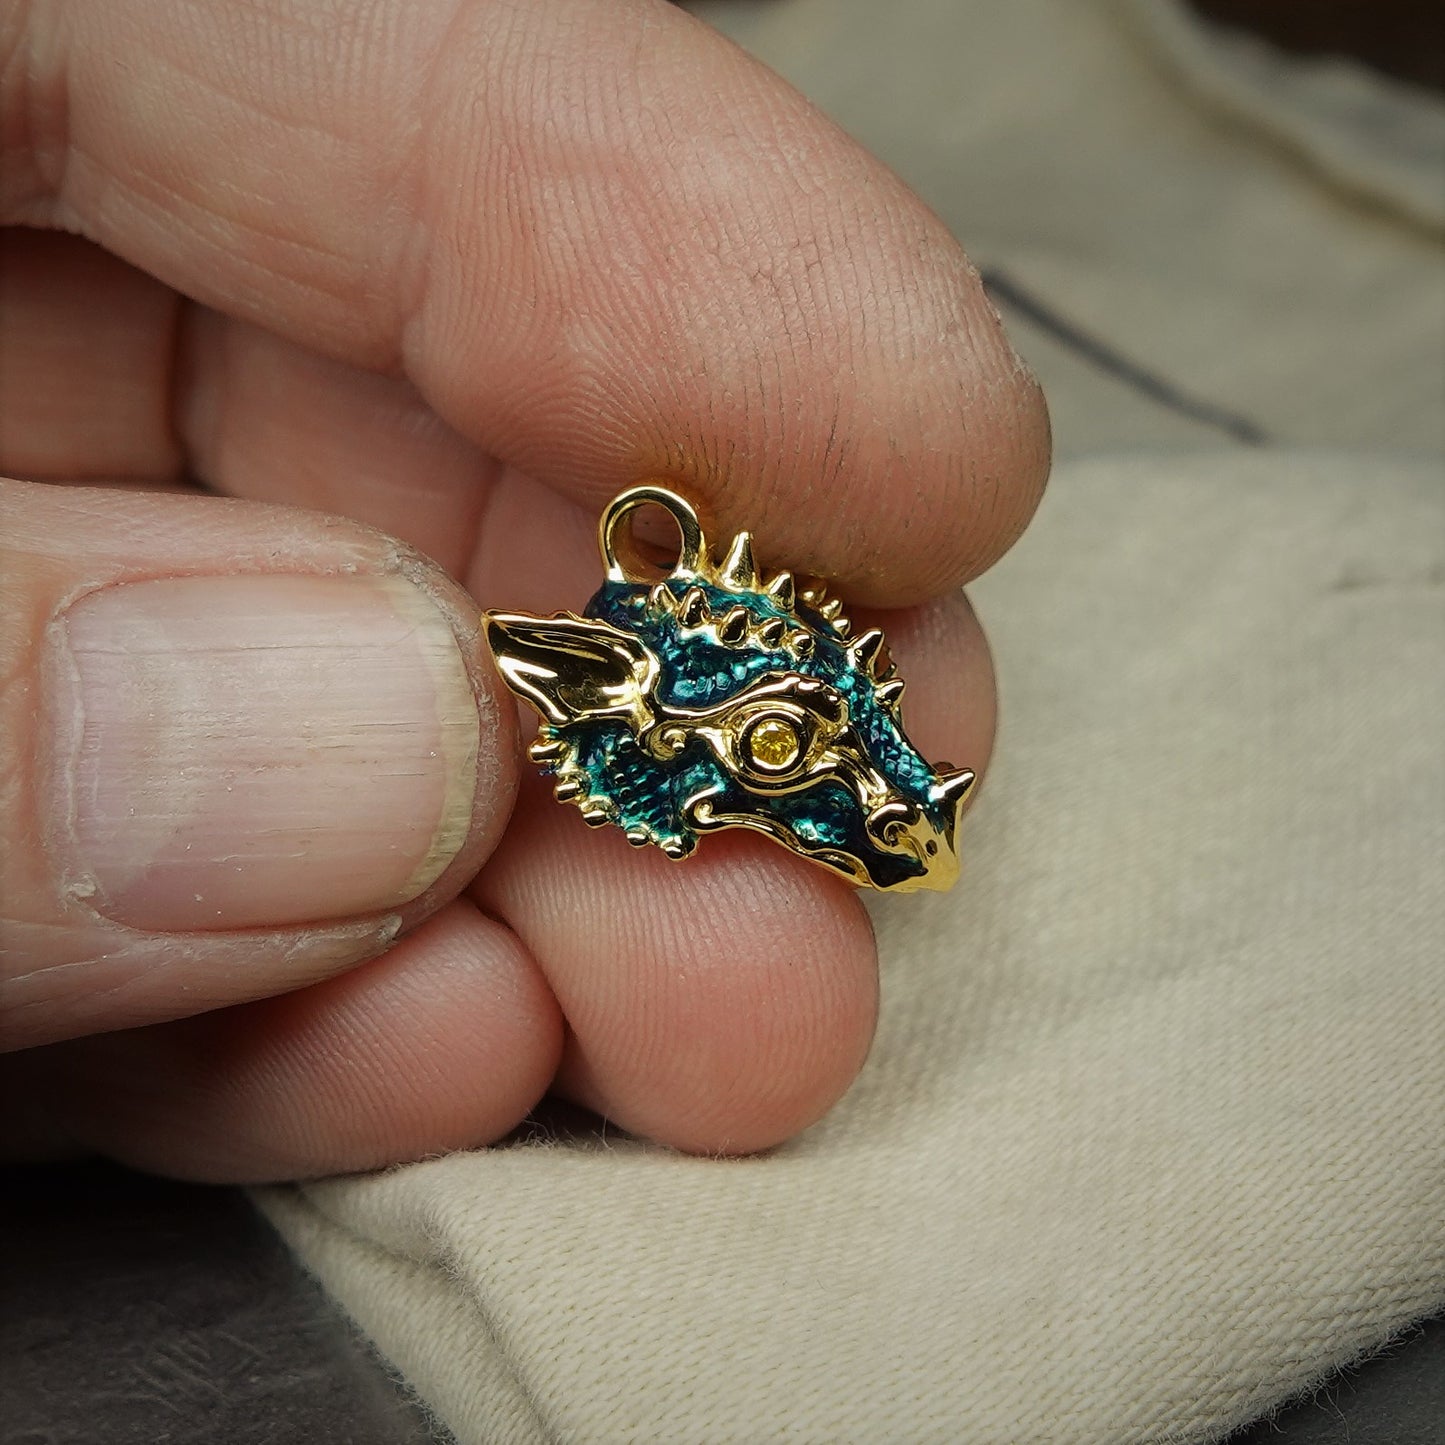 Gold dragon's head with diamond eyes and a gold chain. Handmade to order. © Adrian Ashley